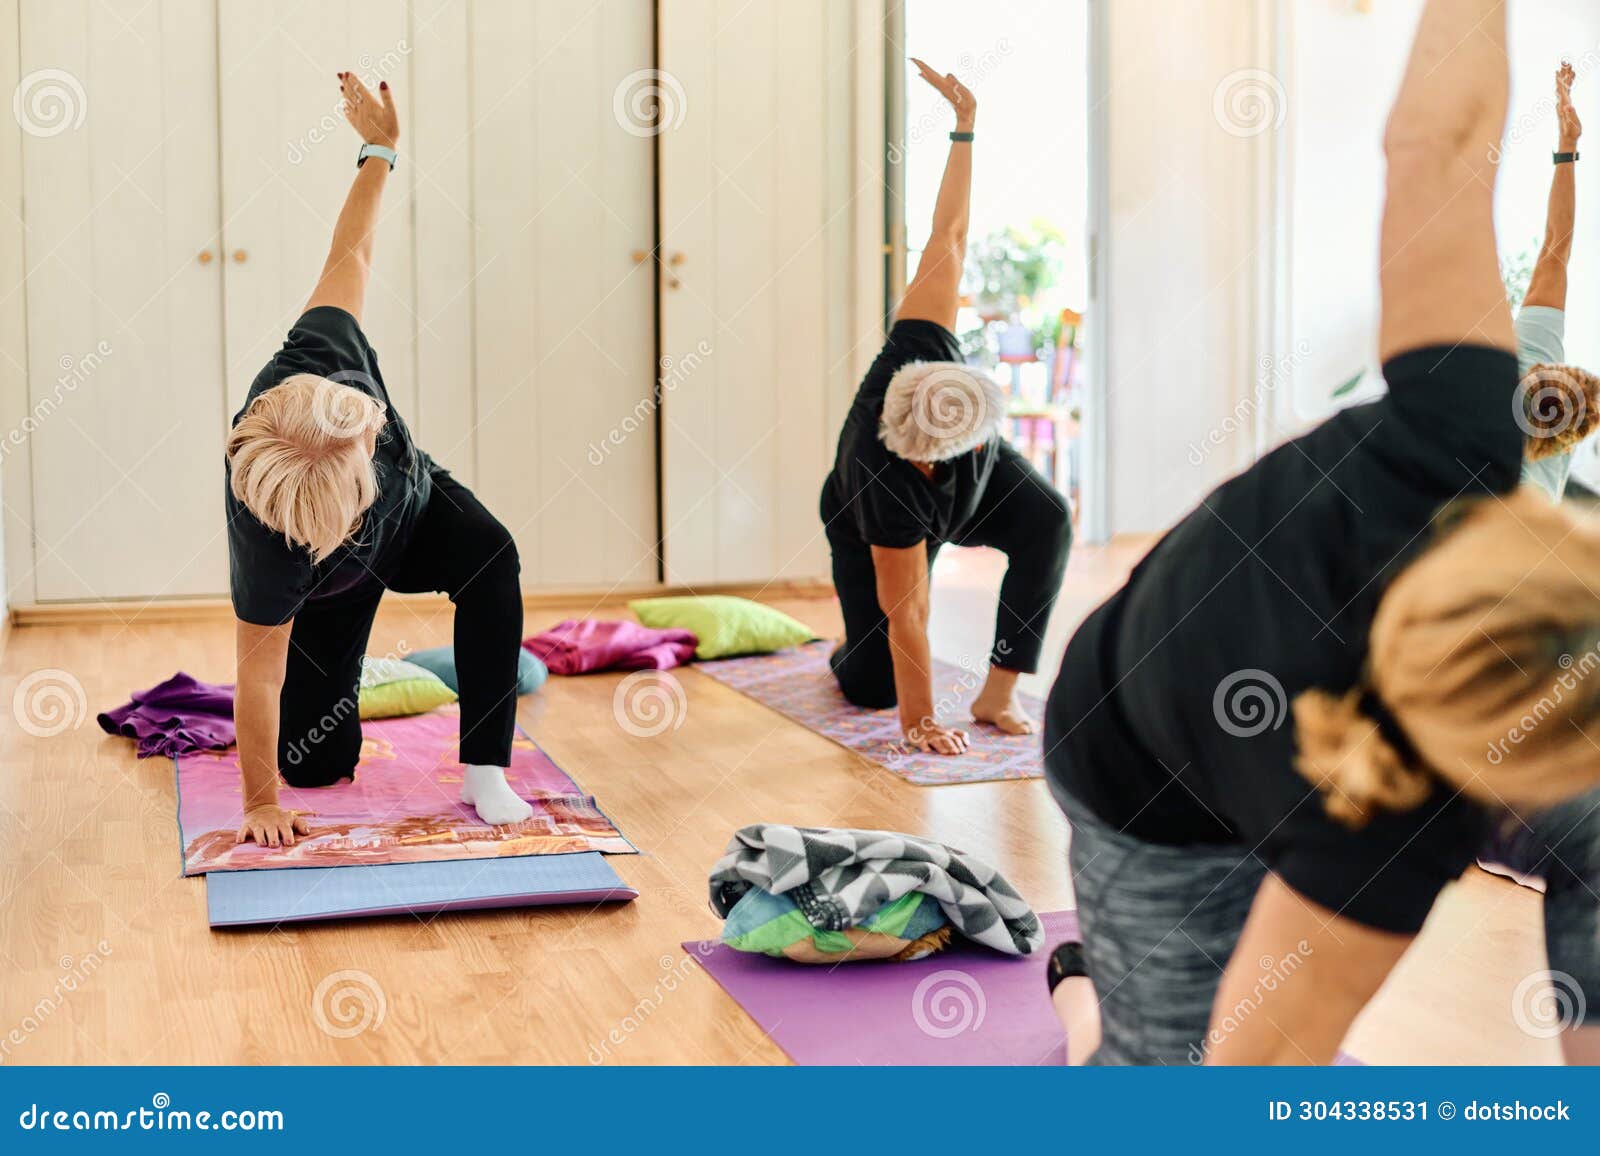 A Group of Senior Women Engage in Various Yoga Exercises, Including ...